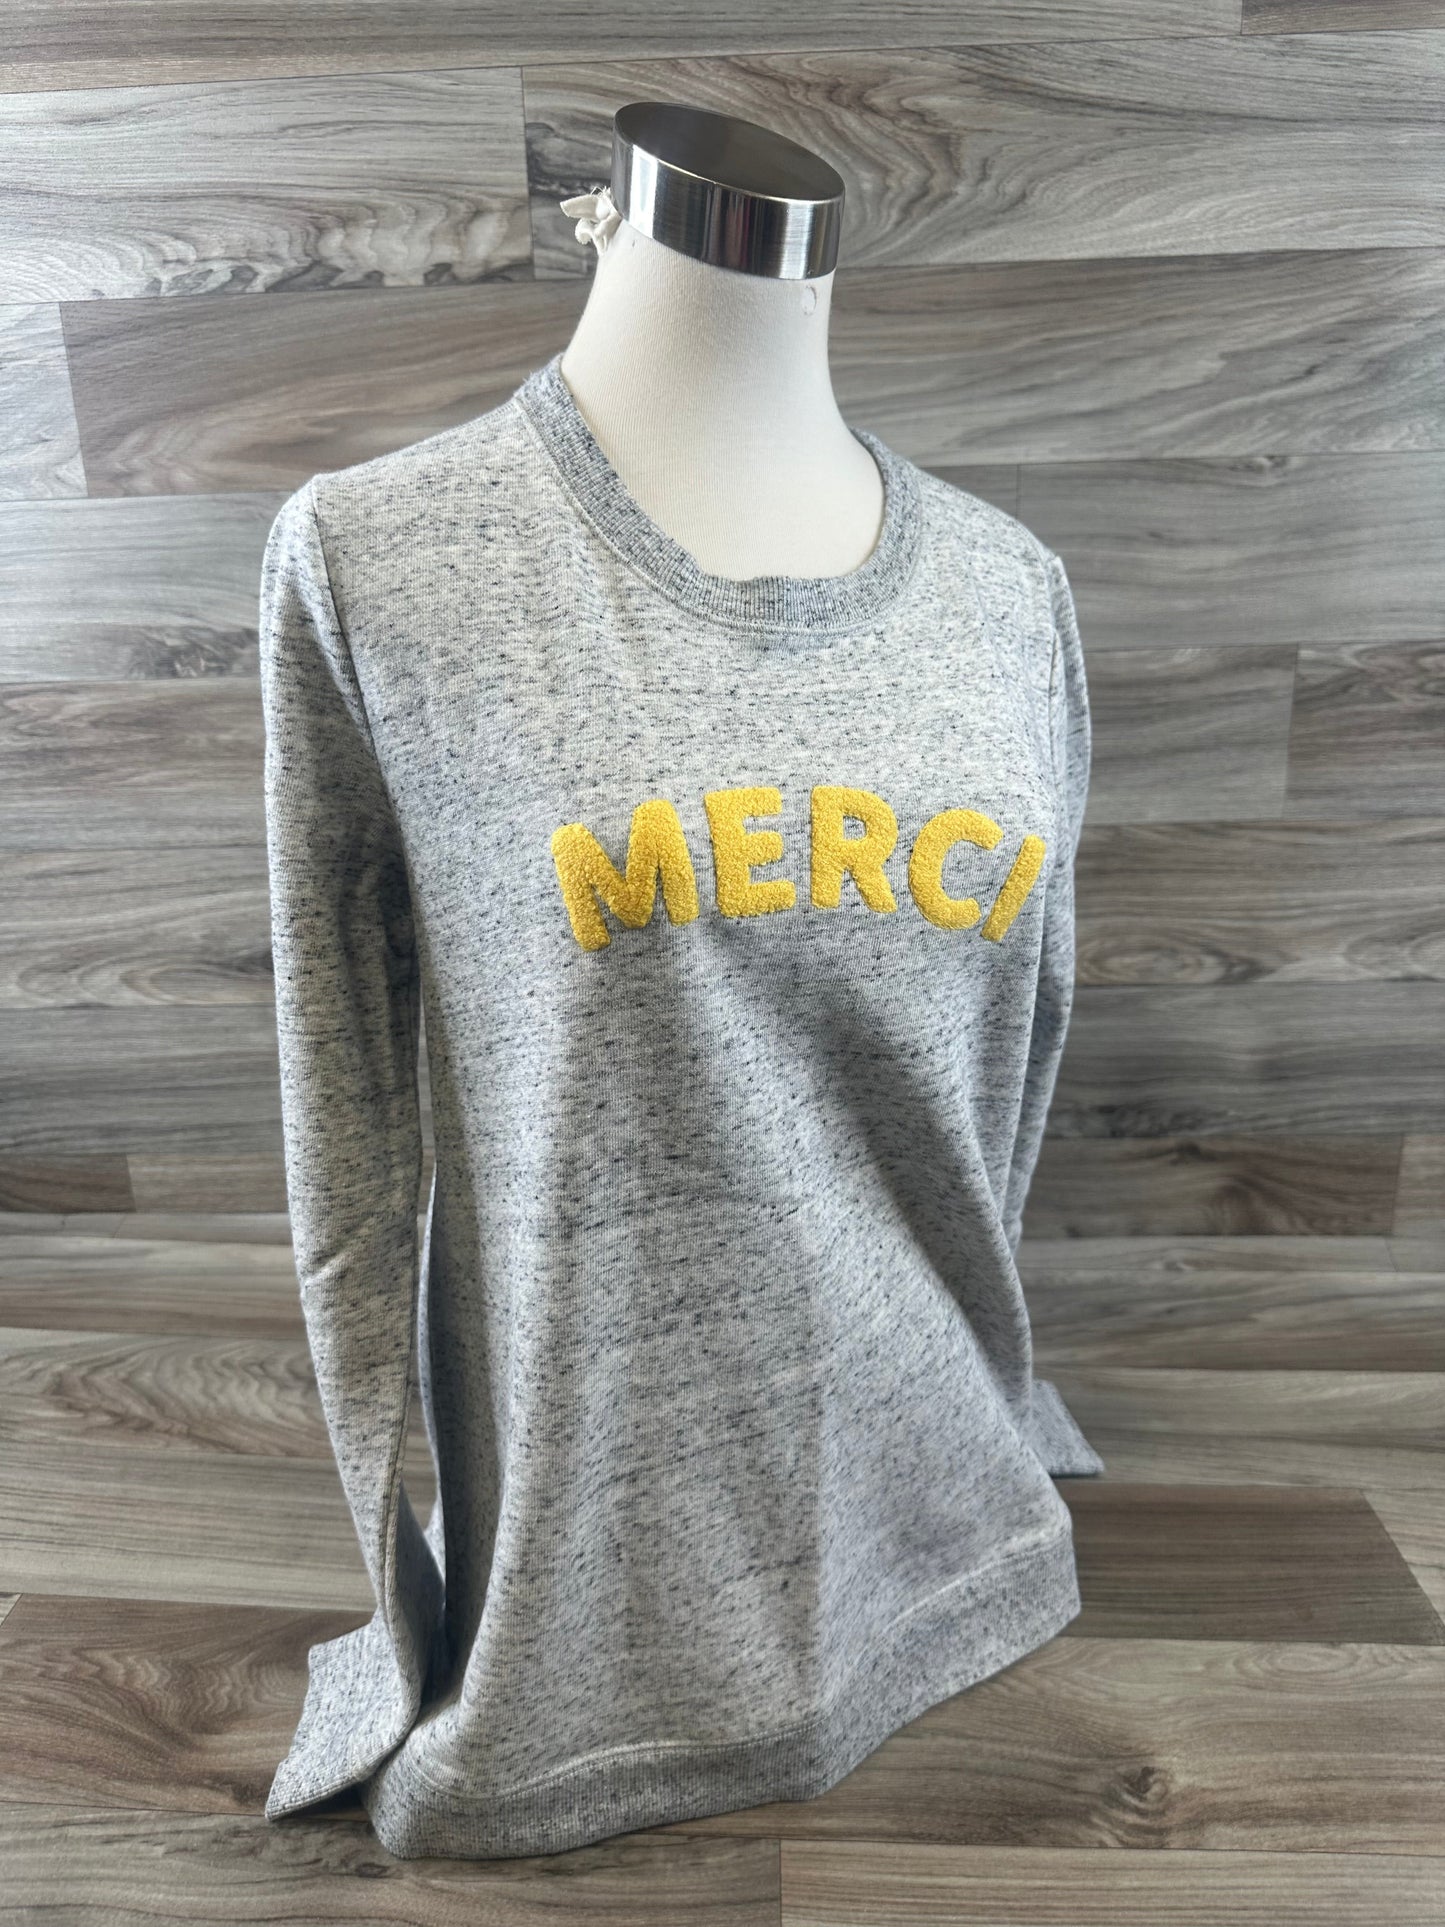 Grey & Yellow Top Long Sleeve Talbots, Size S